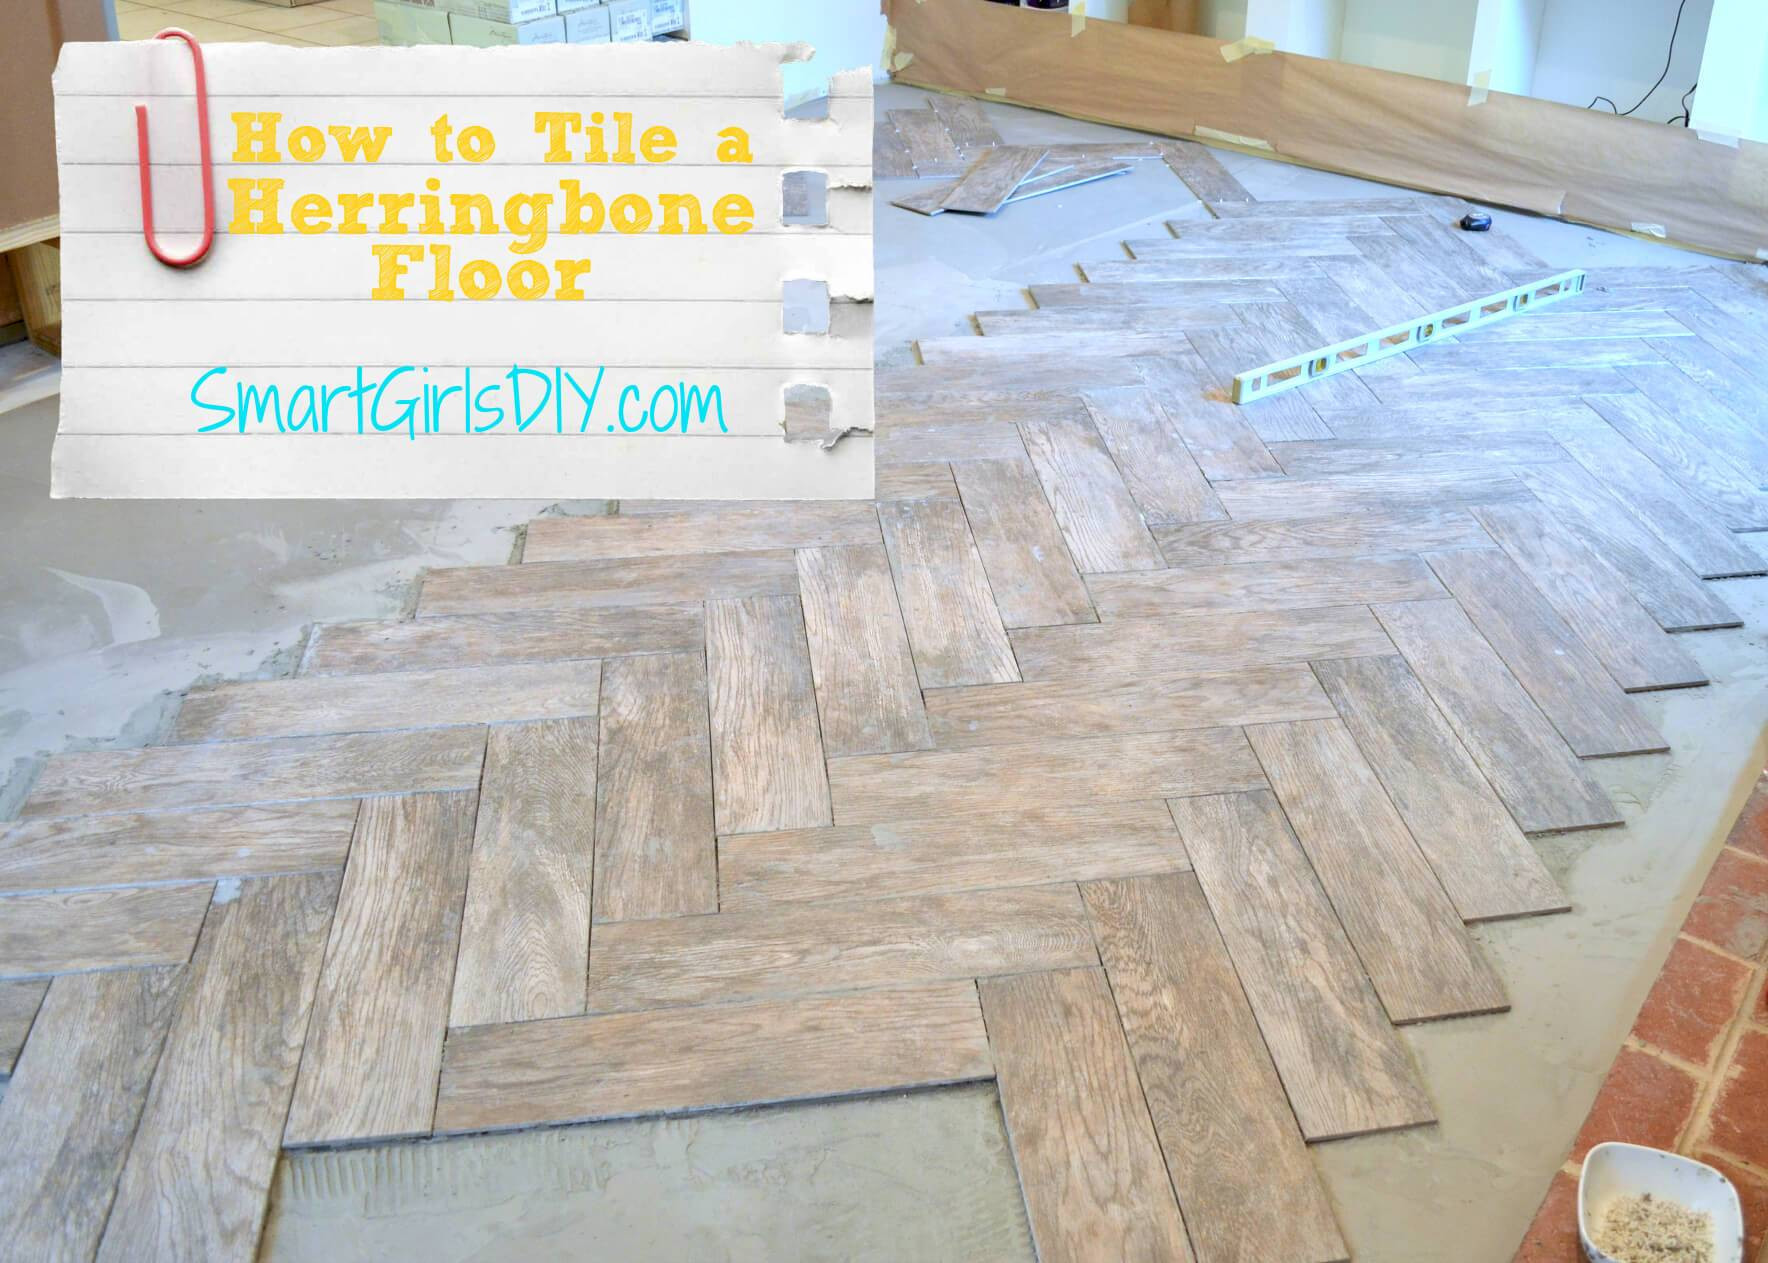 10 Cute How to Install the Hardwood Floor by Yourself 2024 free download how to install the hardwood floor by yourself of how to tile a herringbone floor family room 10 with how to tile a herringbone floor yourself